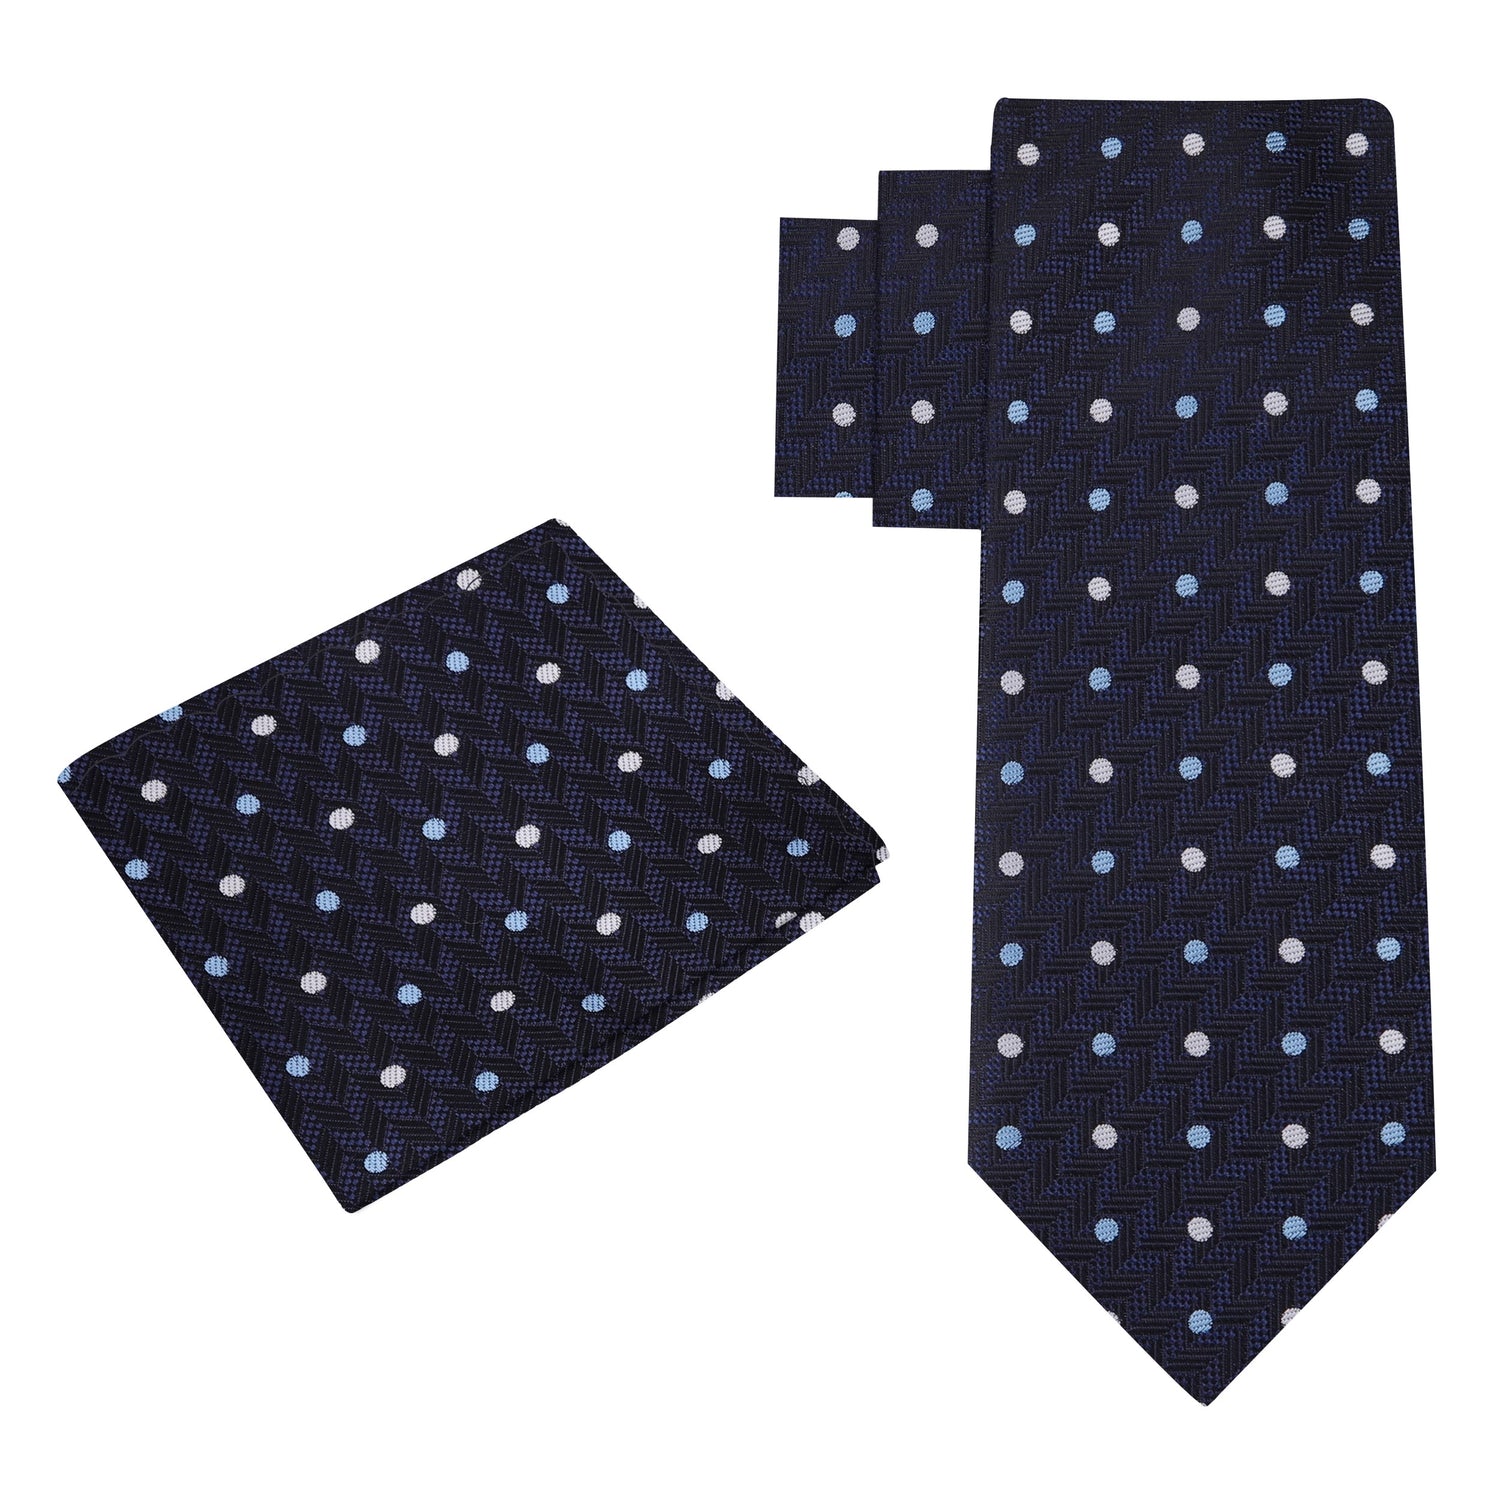 Alt View: Deep Blue, Grey, Light Blue Polka with Herringbone Tie and Matching Square